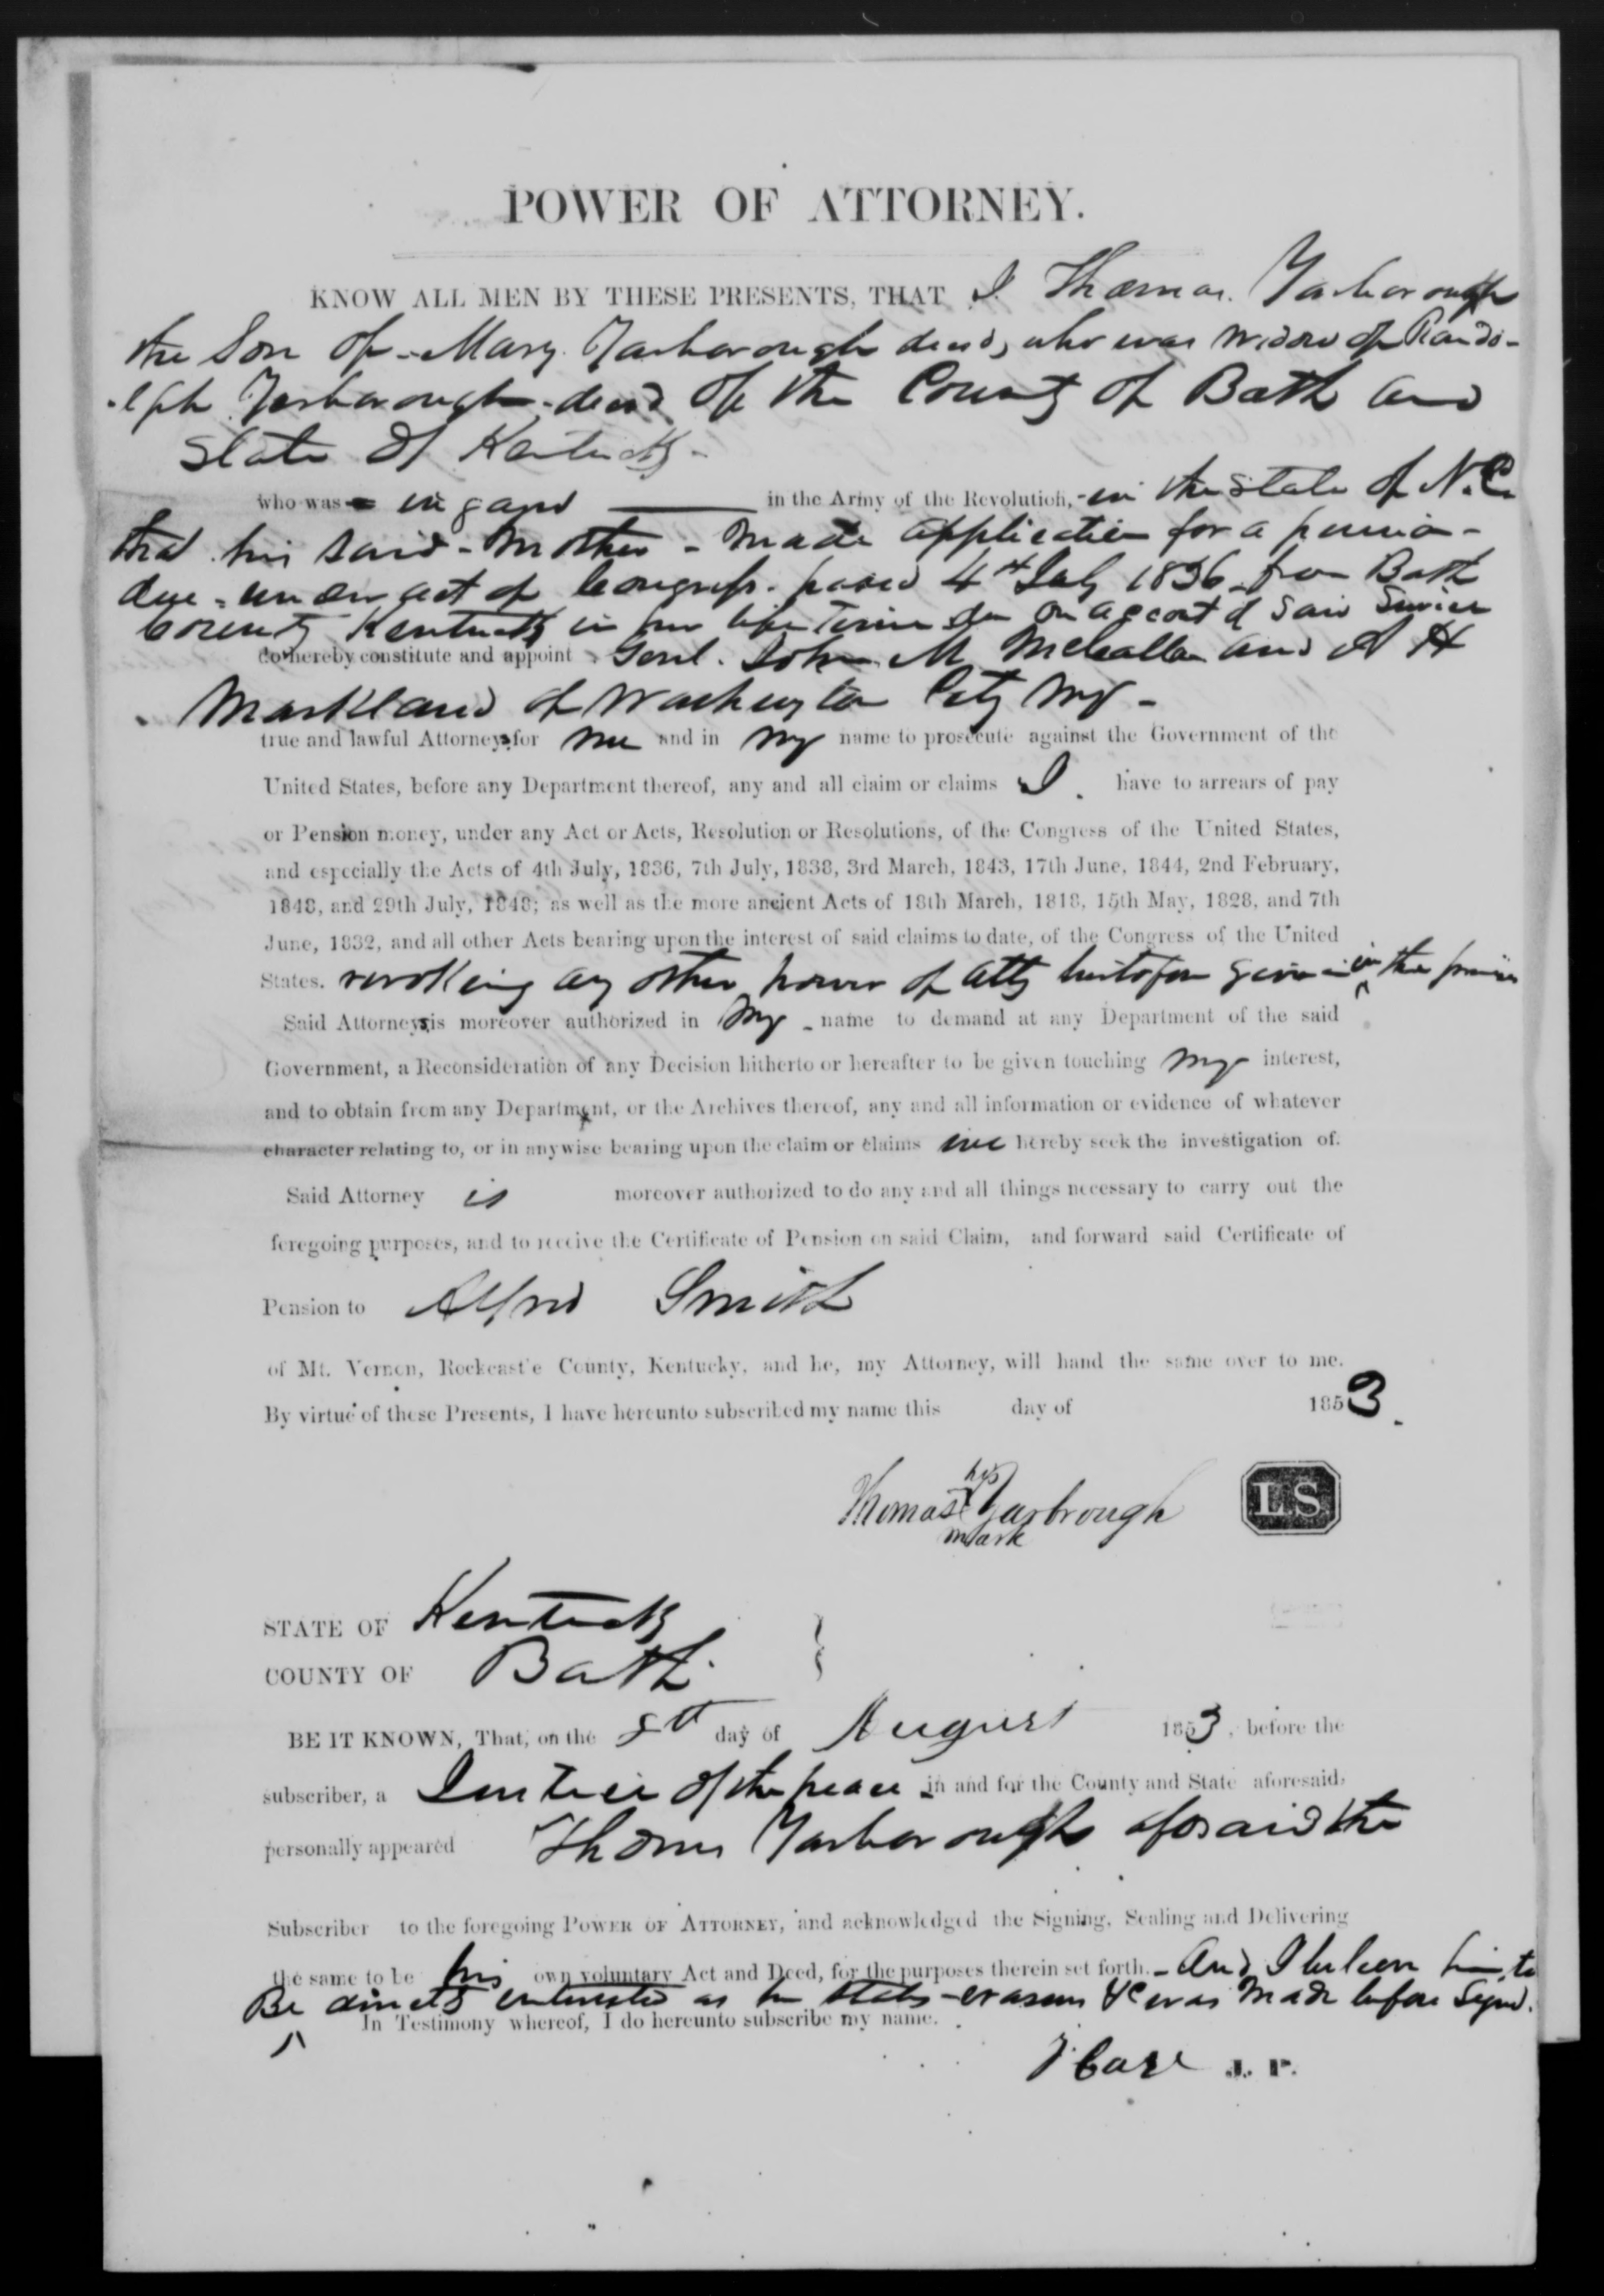 Appointment of John M. McCalla and A. H. Markland as Thomas Yarborough's Power of Attorney, 8 August 1853, page 1